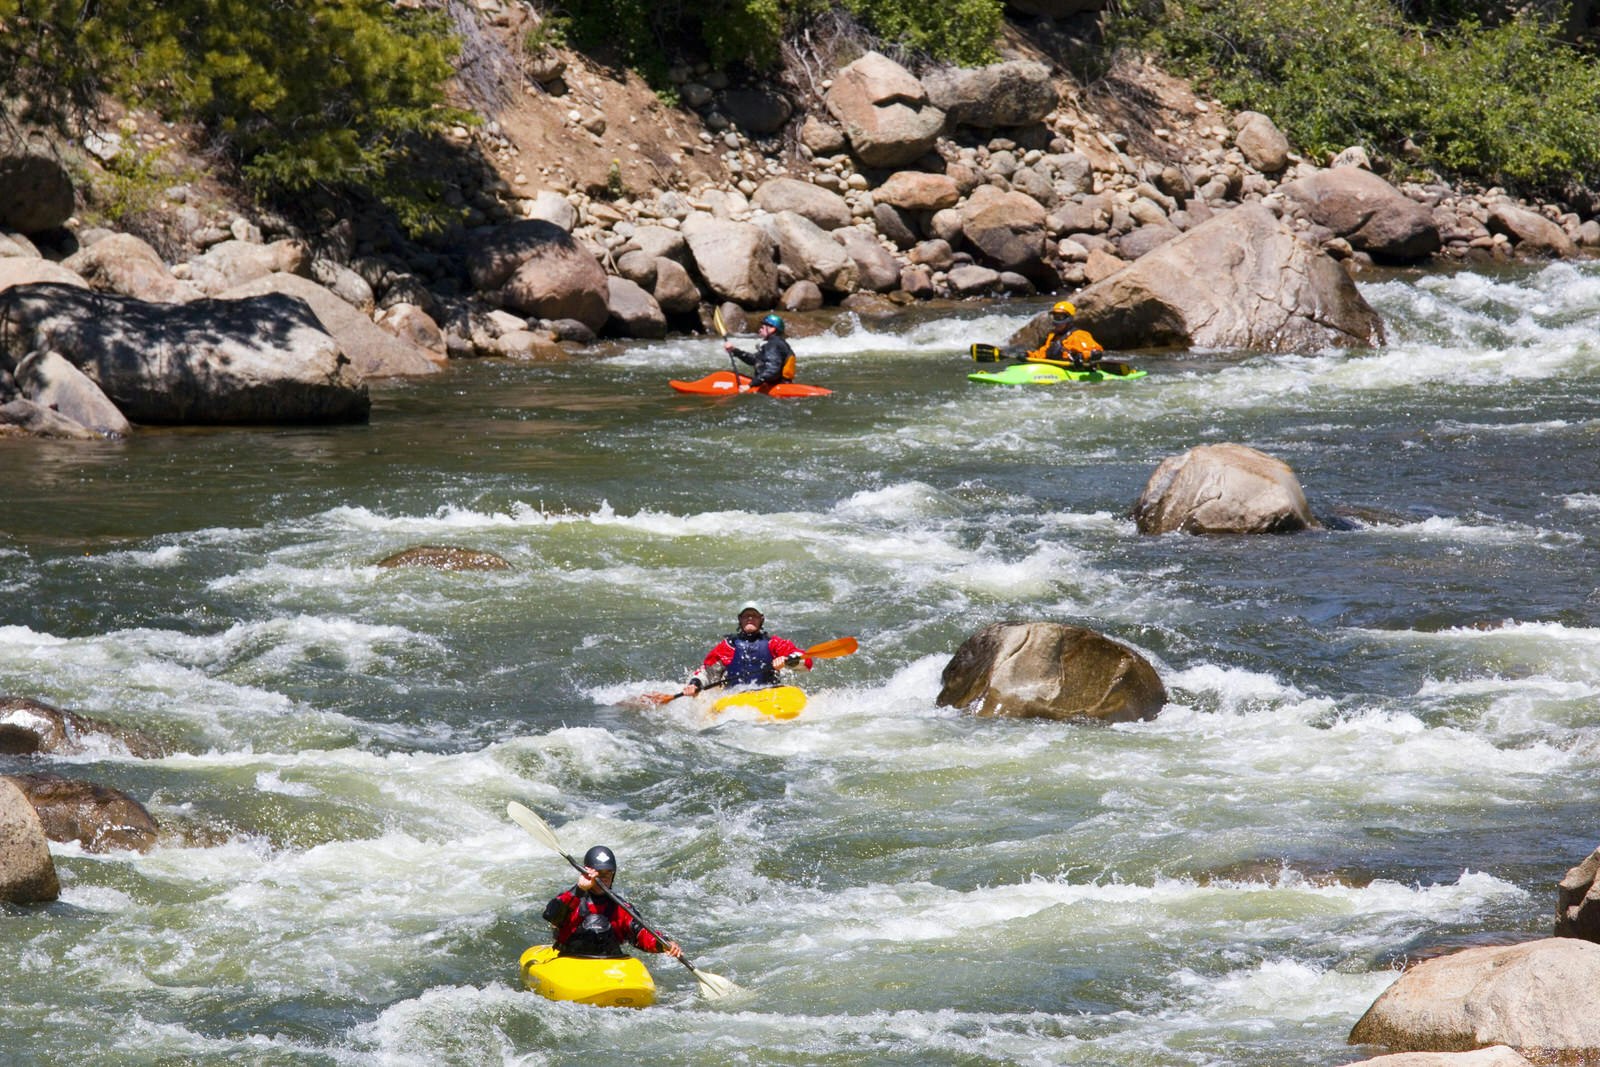 A caravan of whitewater rafts bobs down the Arkansas river in Colorado © Getty Images